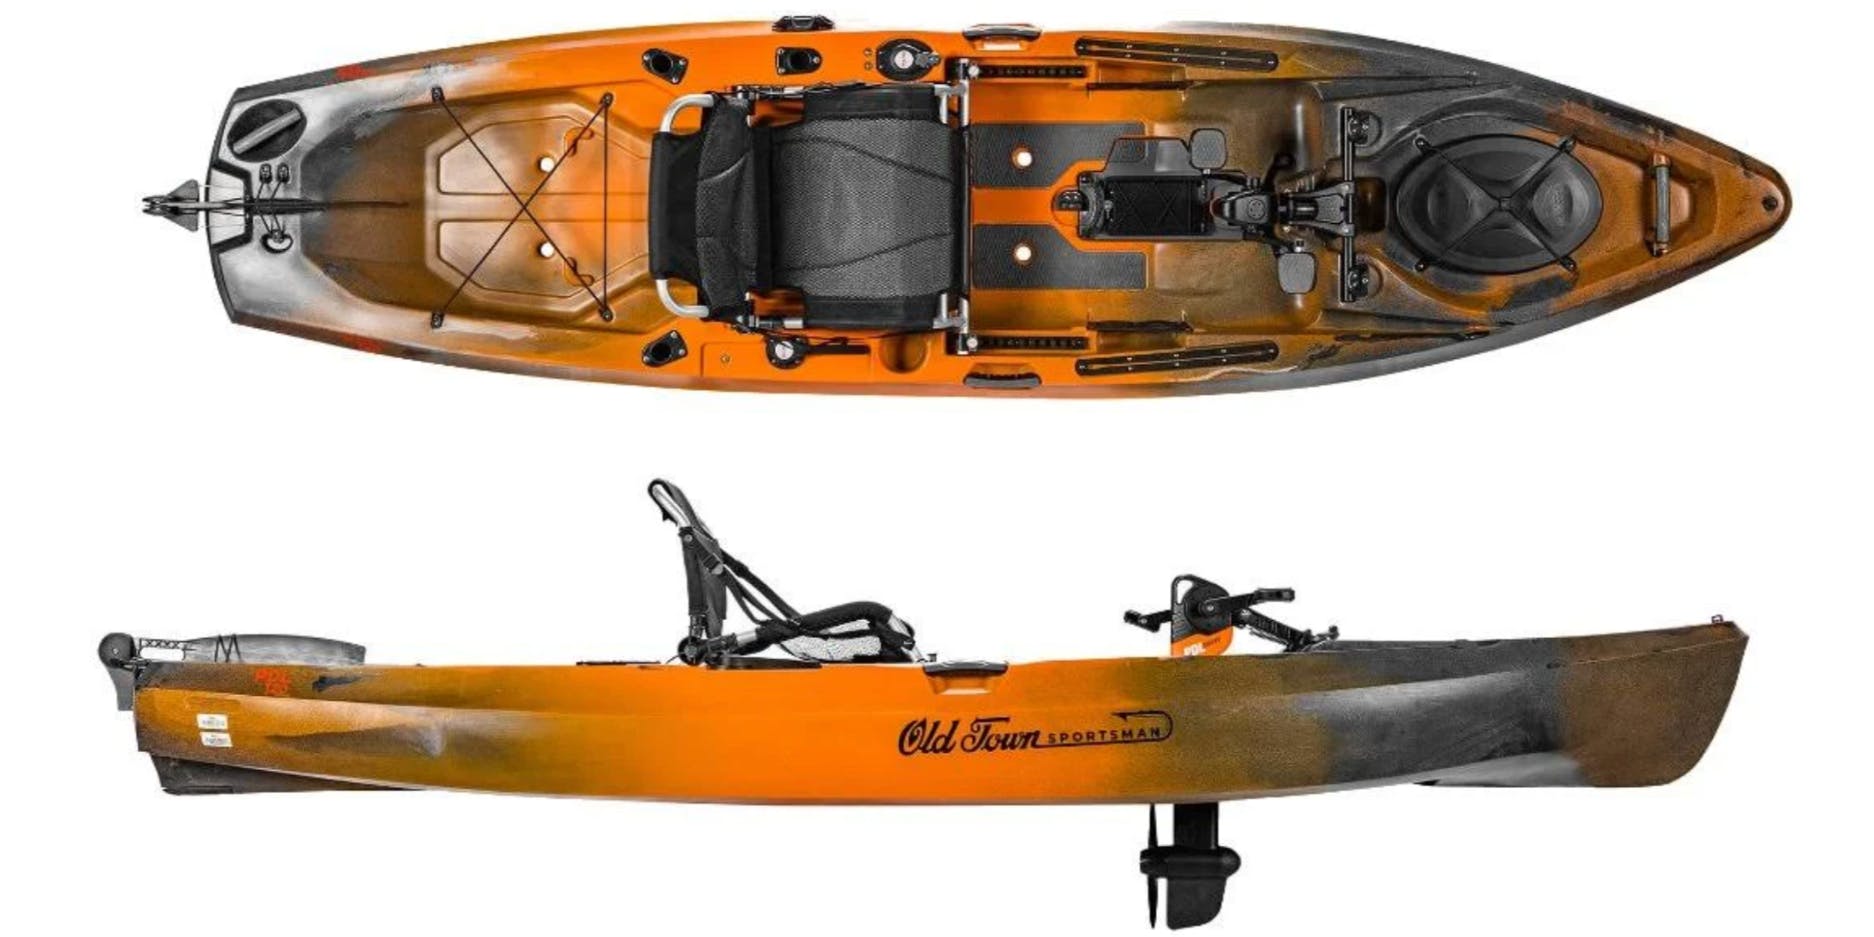 Top down view and side view of the Old Town Kayak.